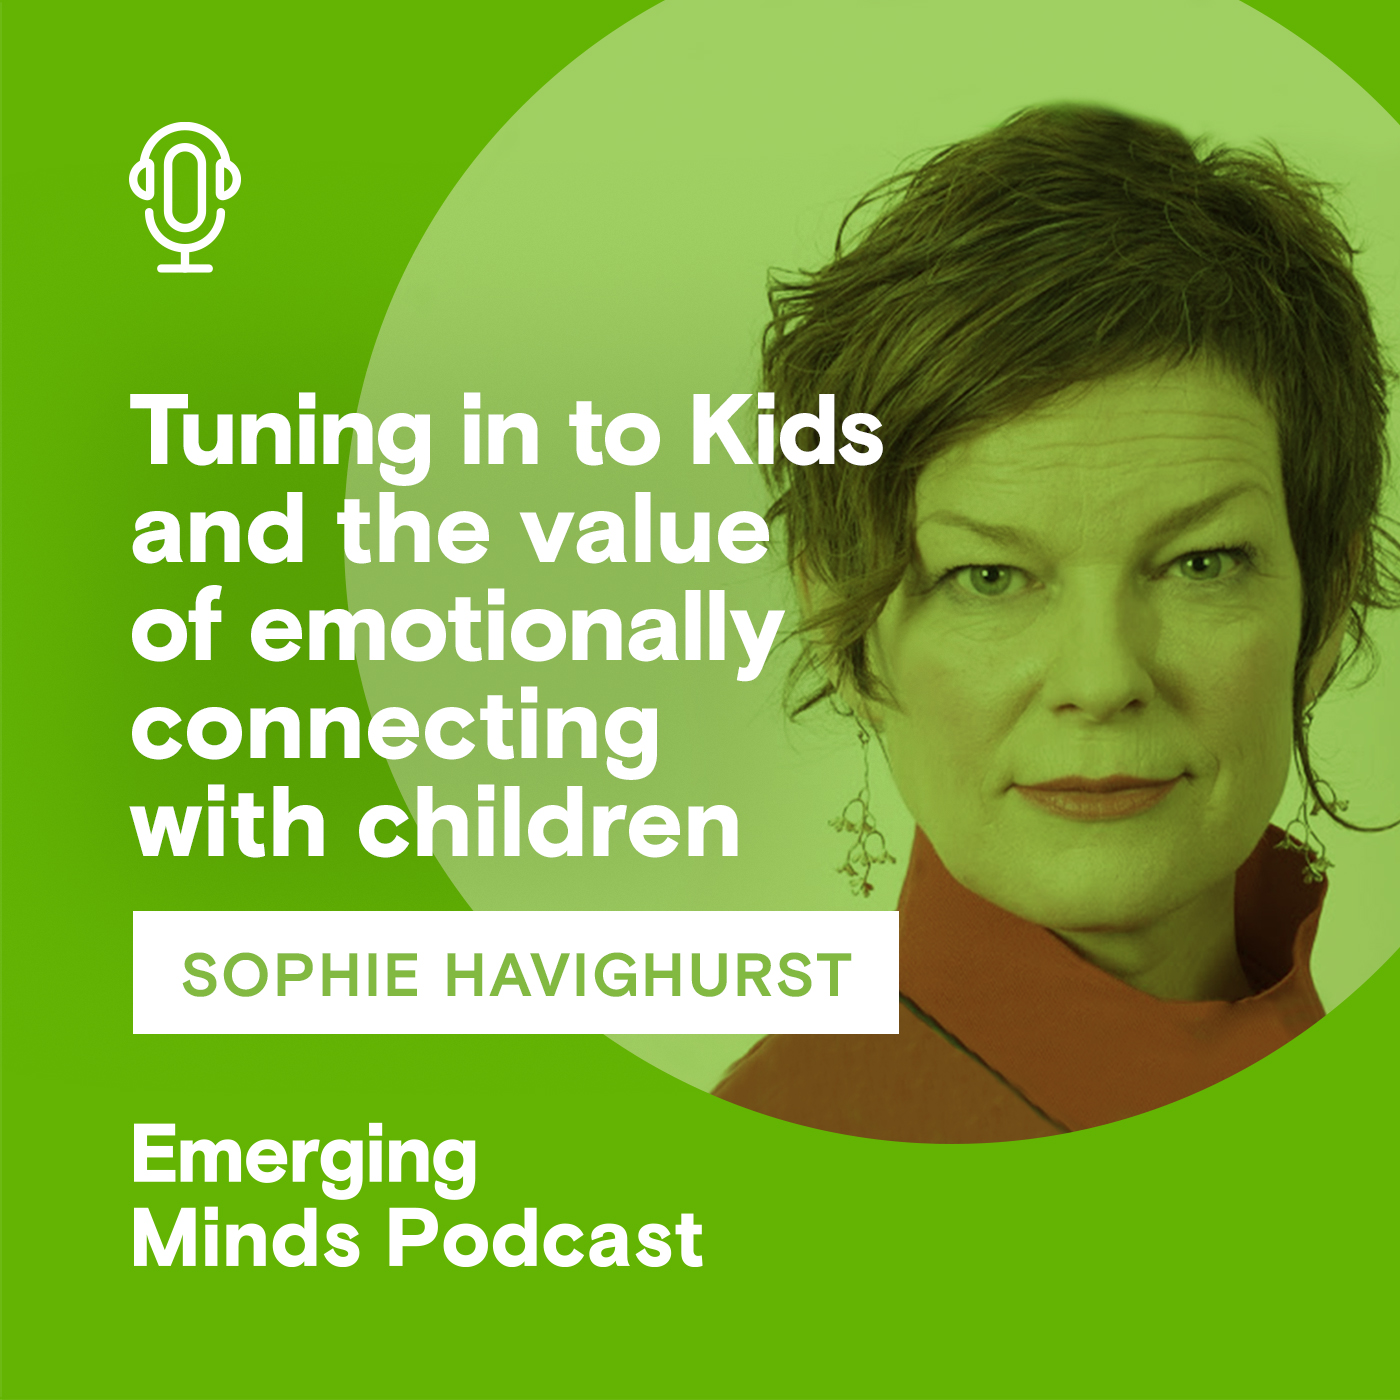 Tuning in to Kids and the value of emotionally connecting with children